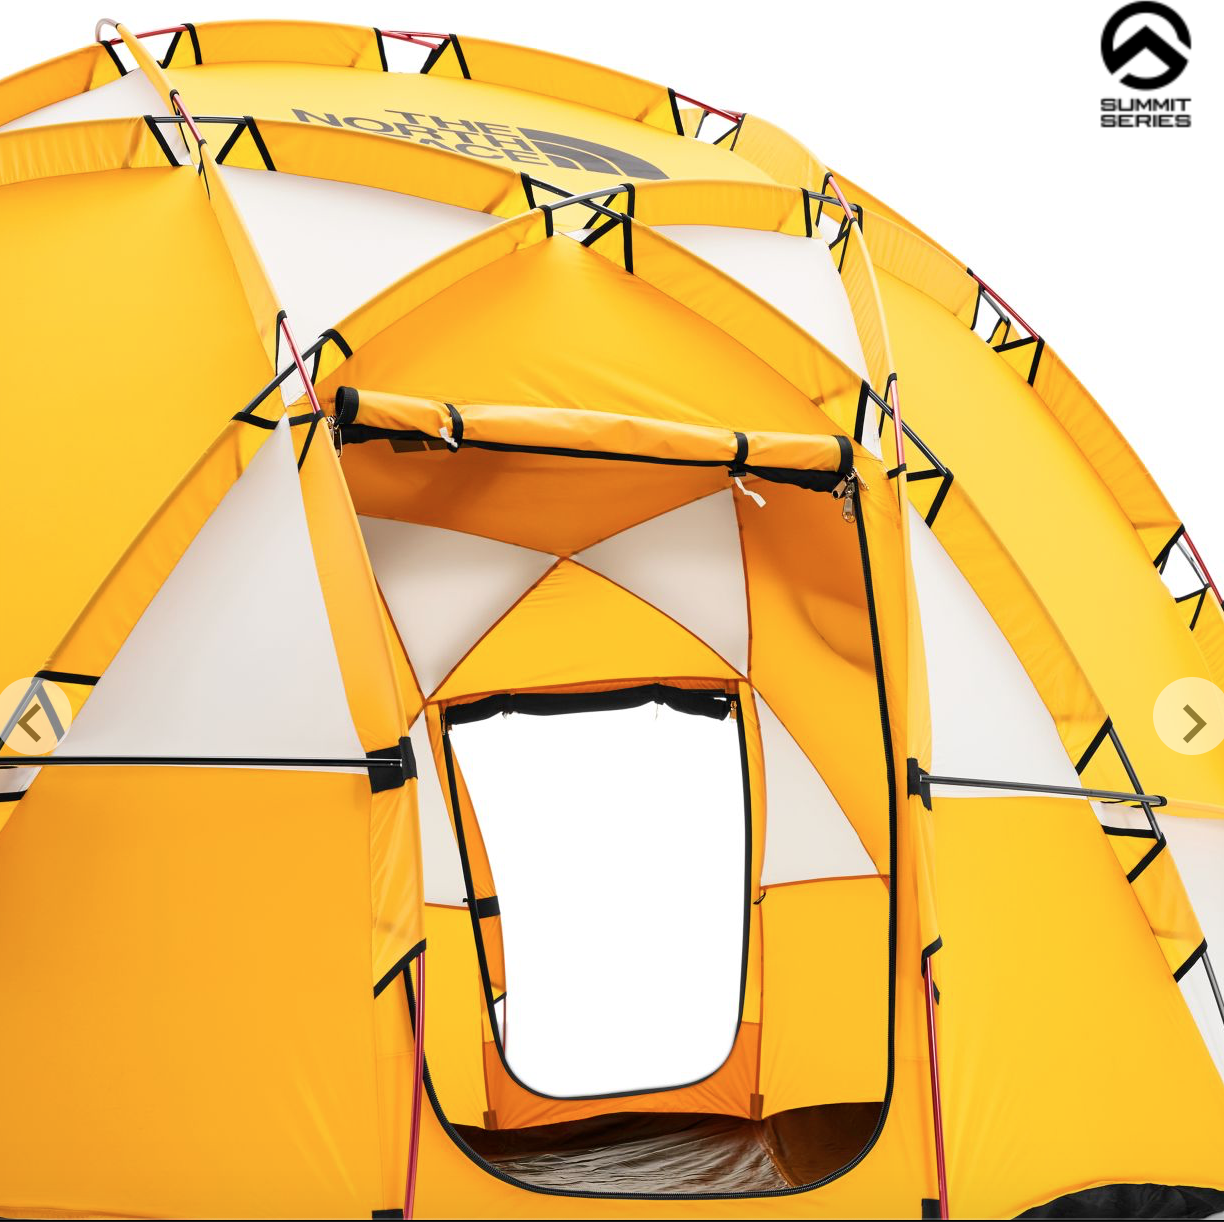 North Face Base Camp Dome Tent